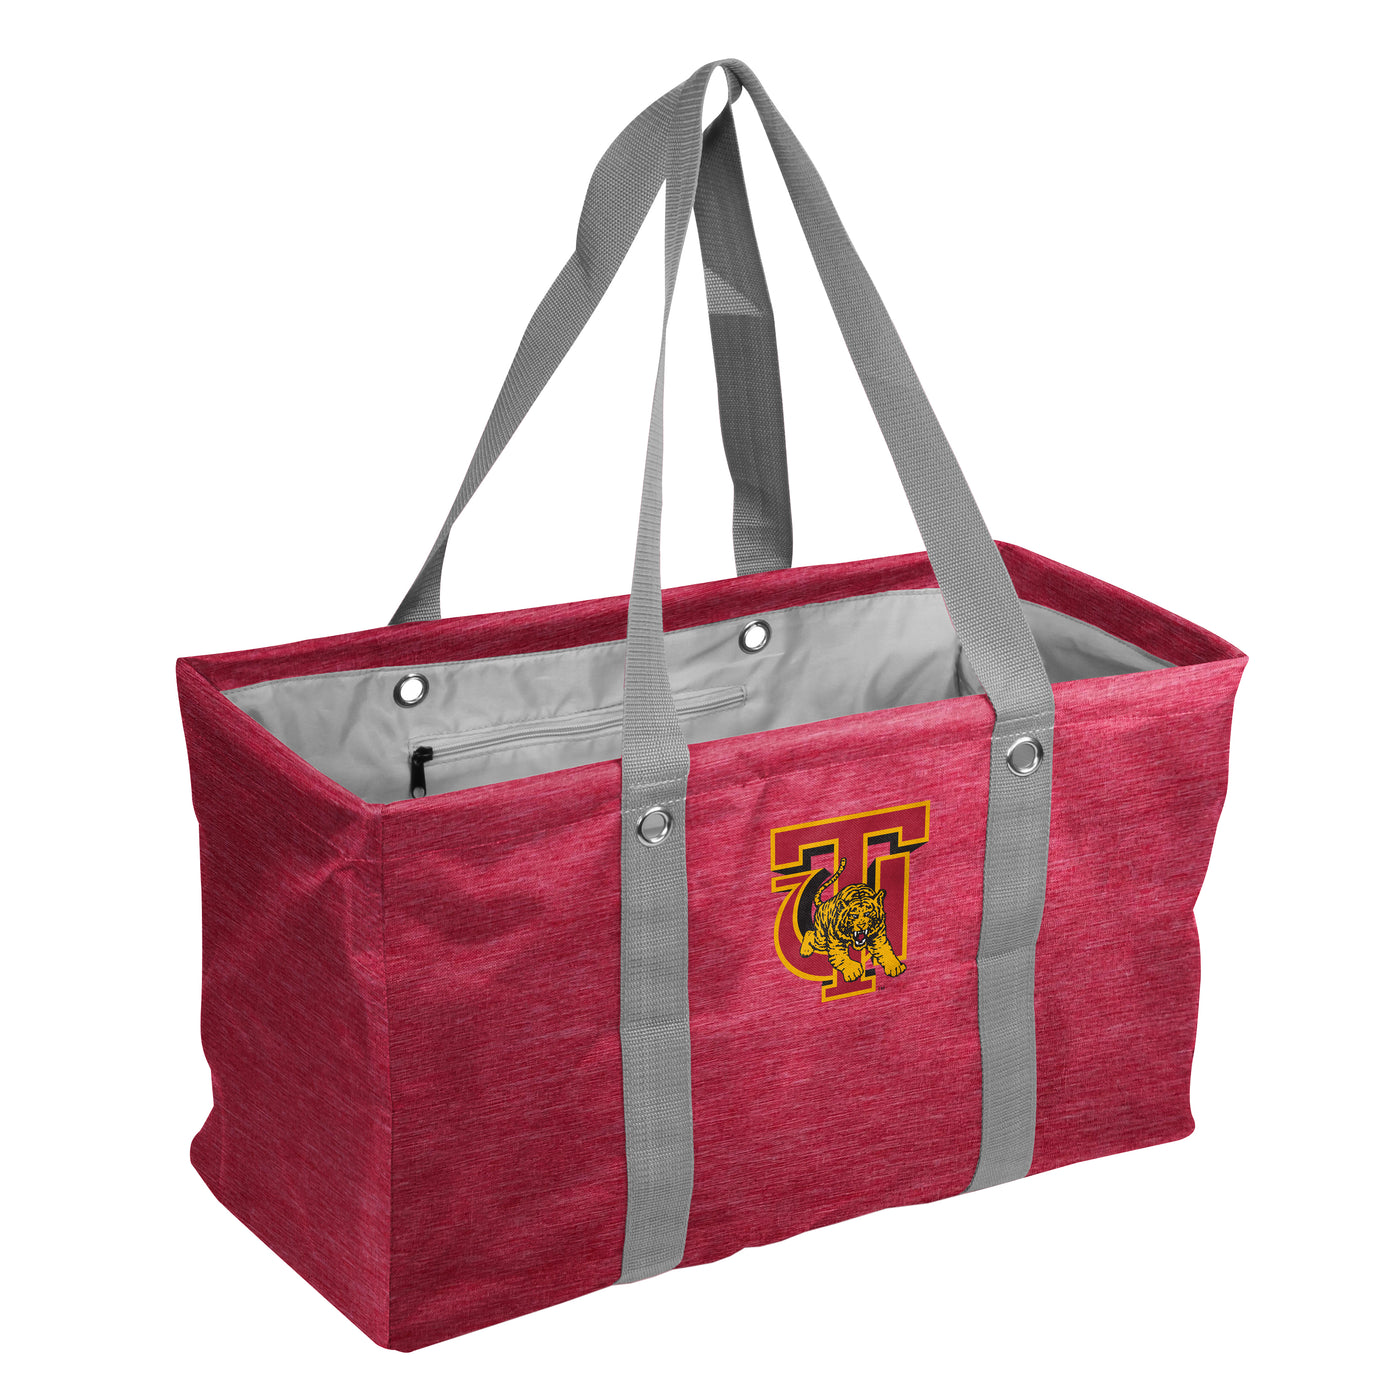 Tuskegee Picnic Caddy